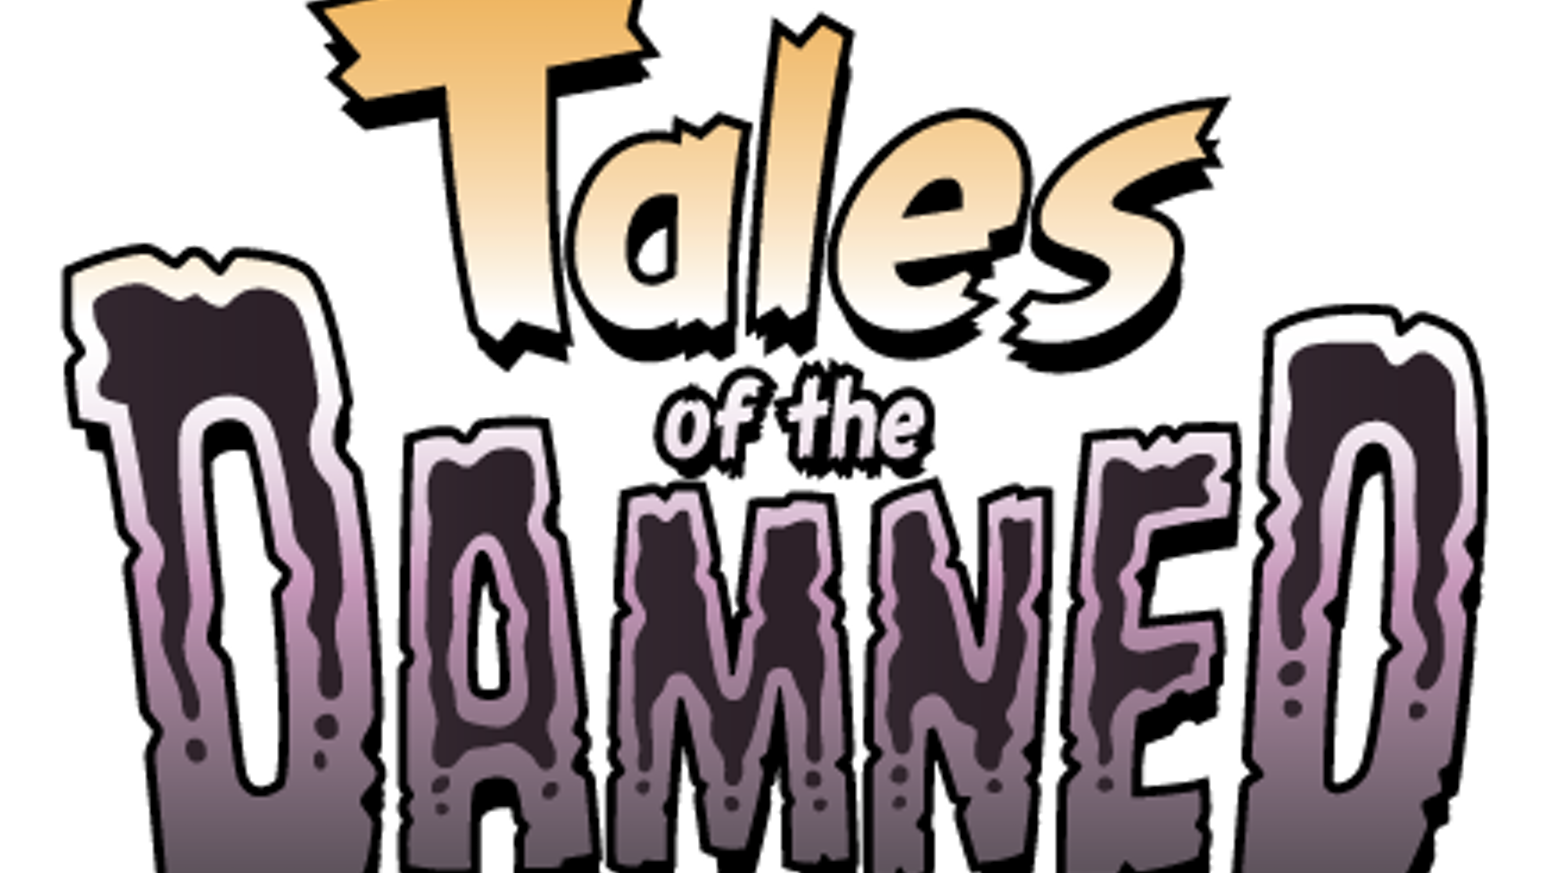 Tales of the damned. Grave clipart horror